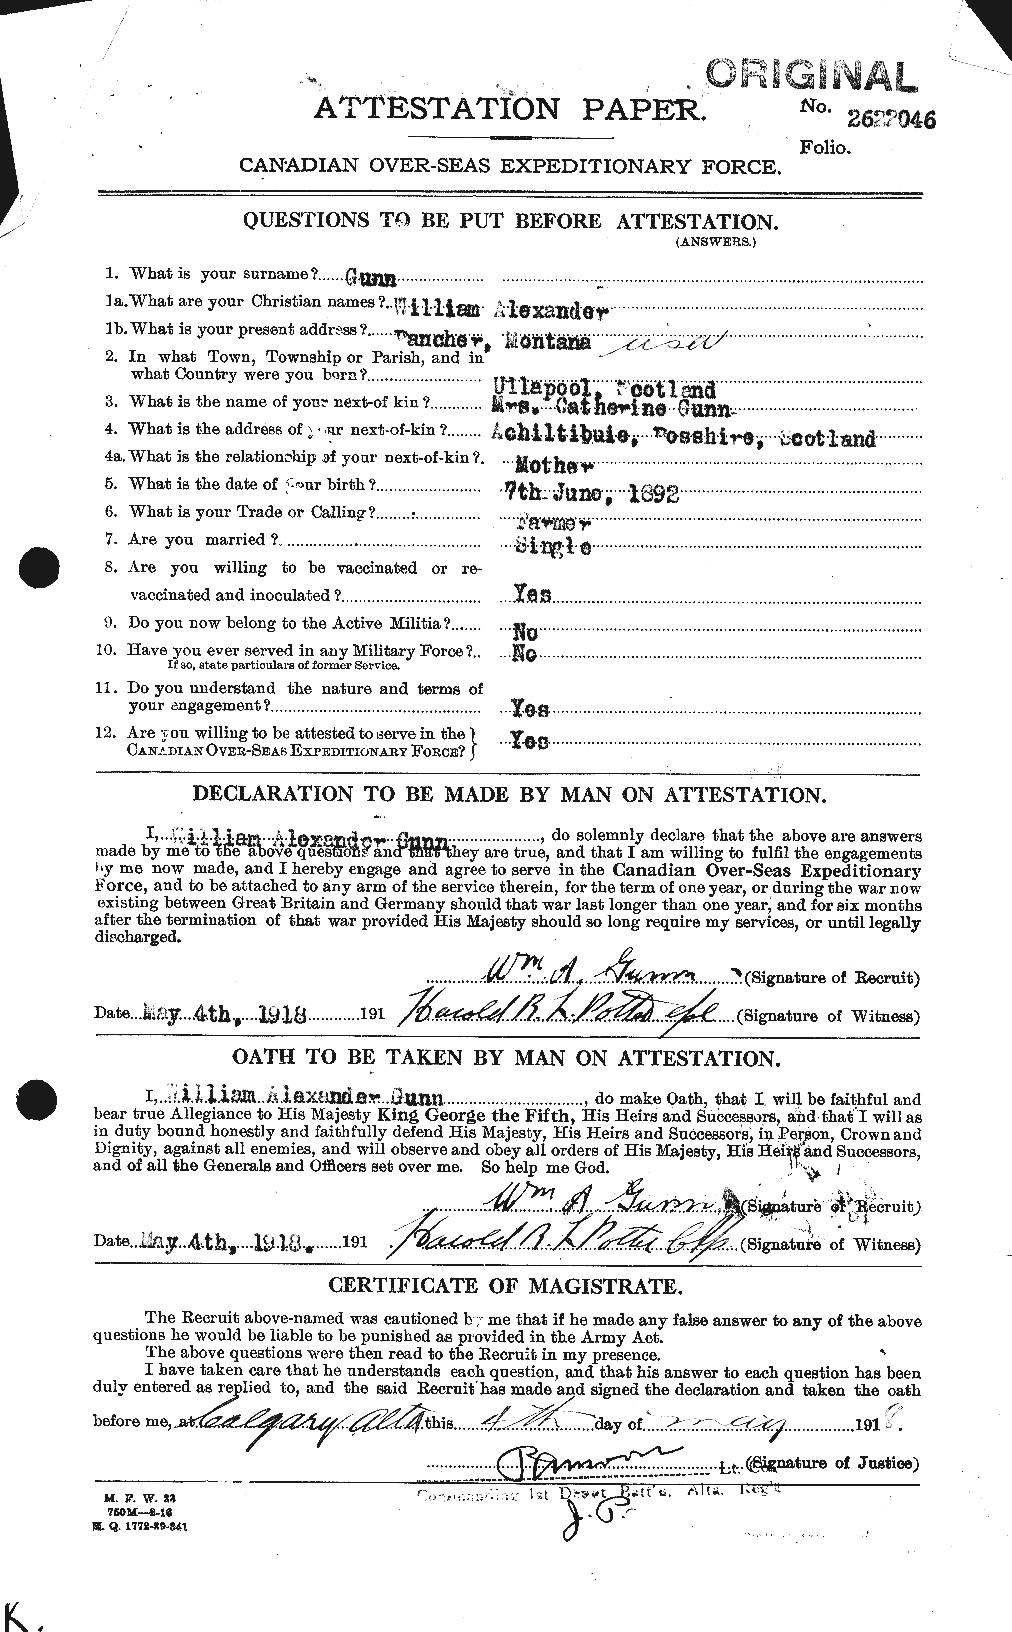 Personnel Records of the First World War - CEF 369360a